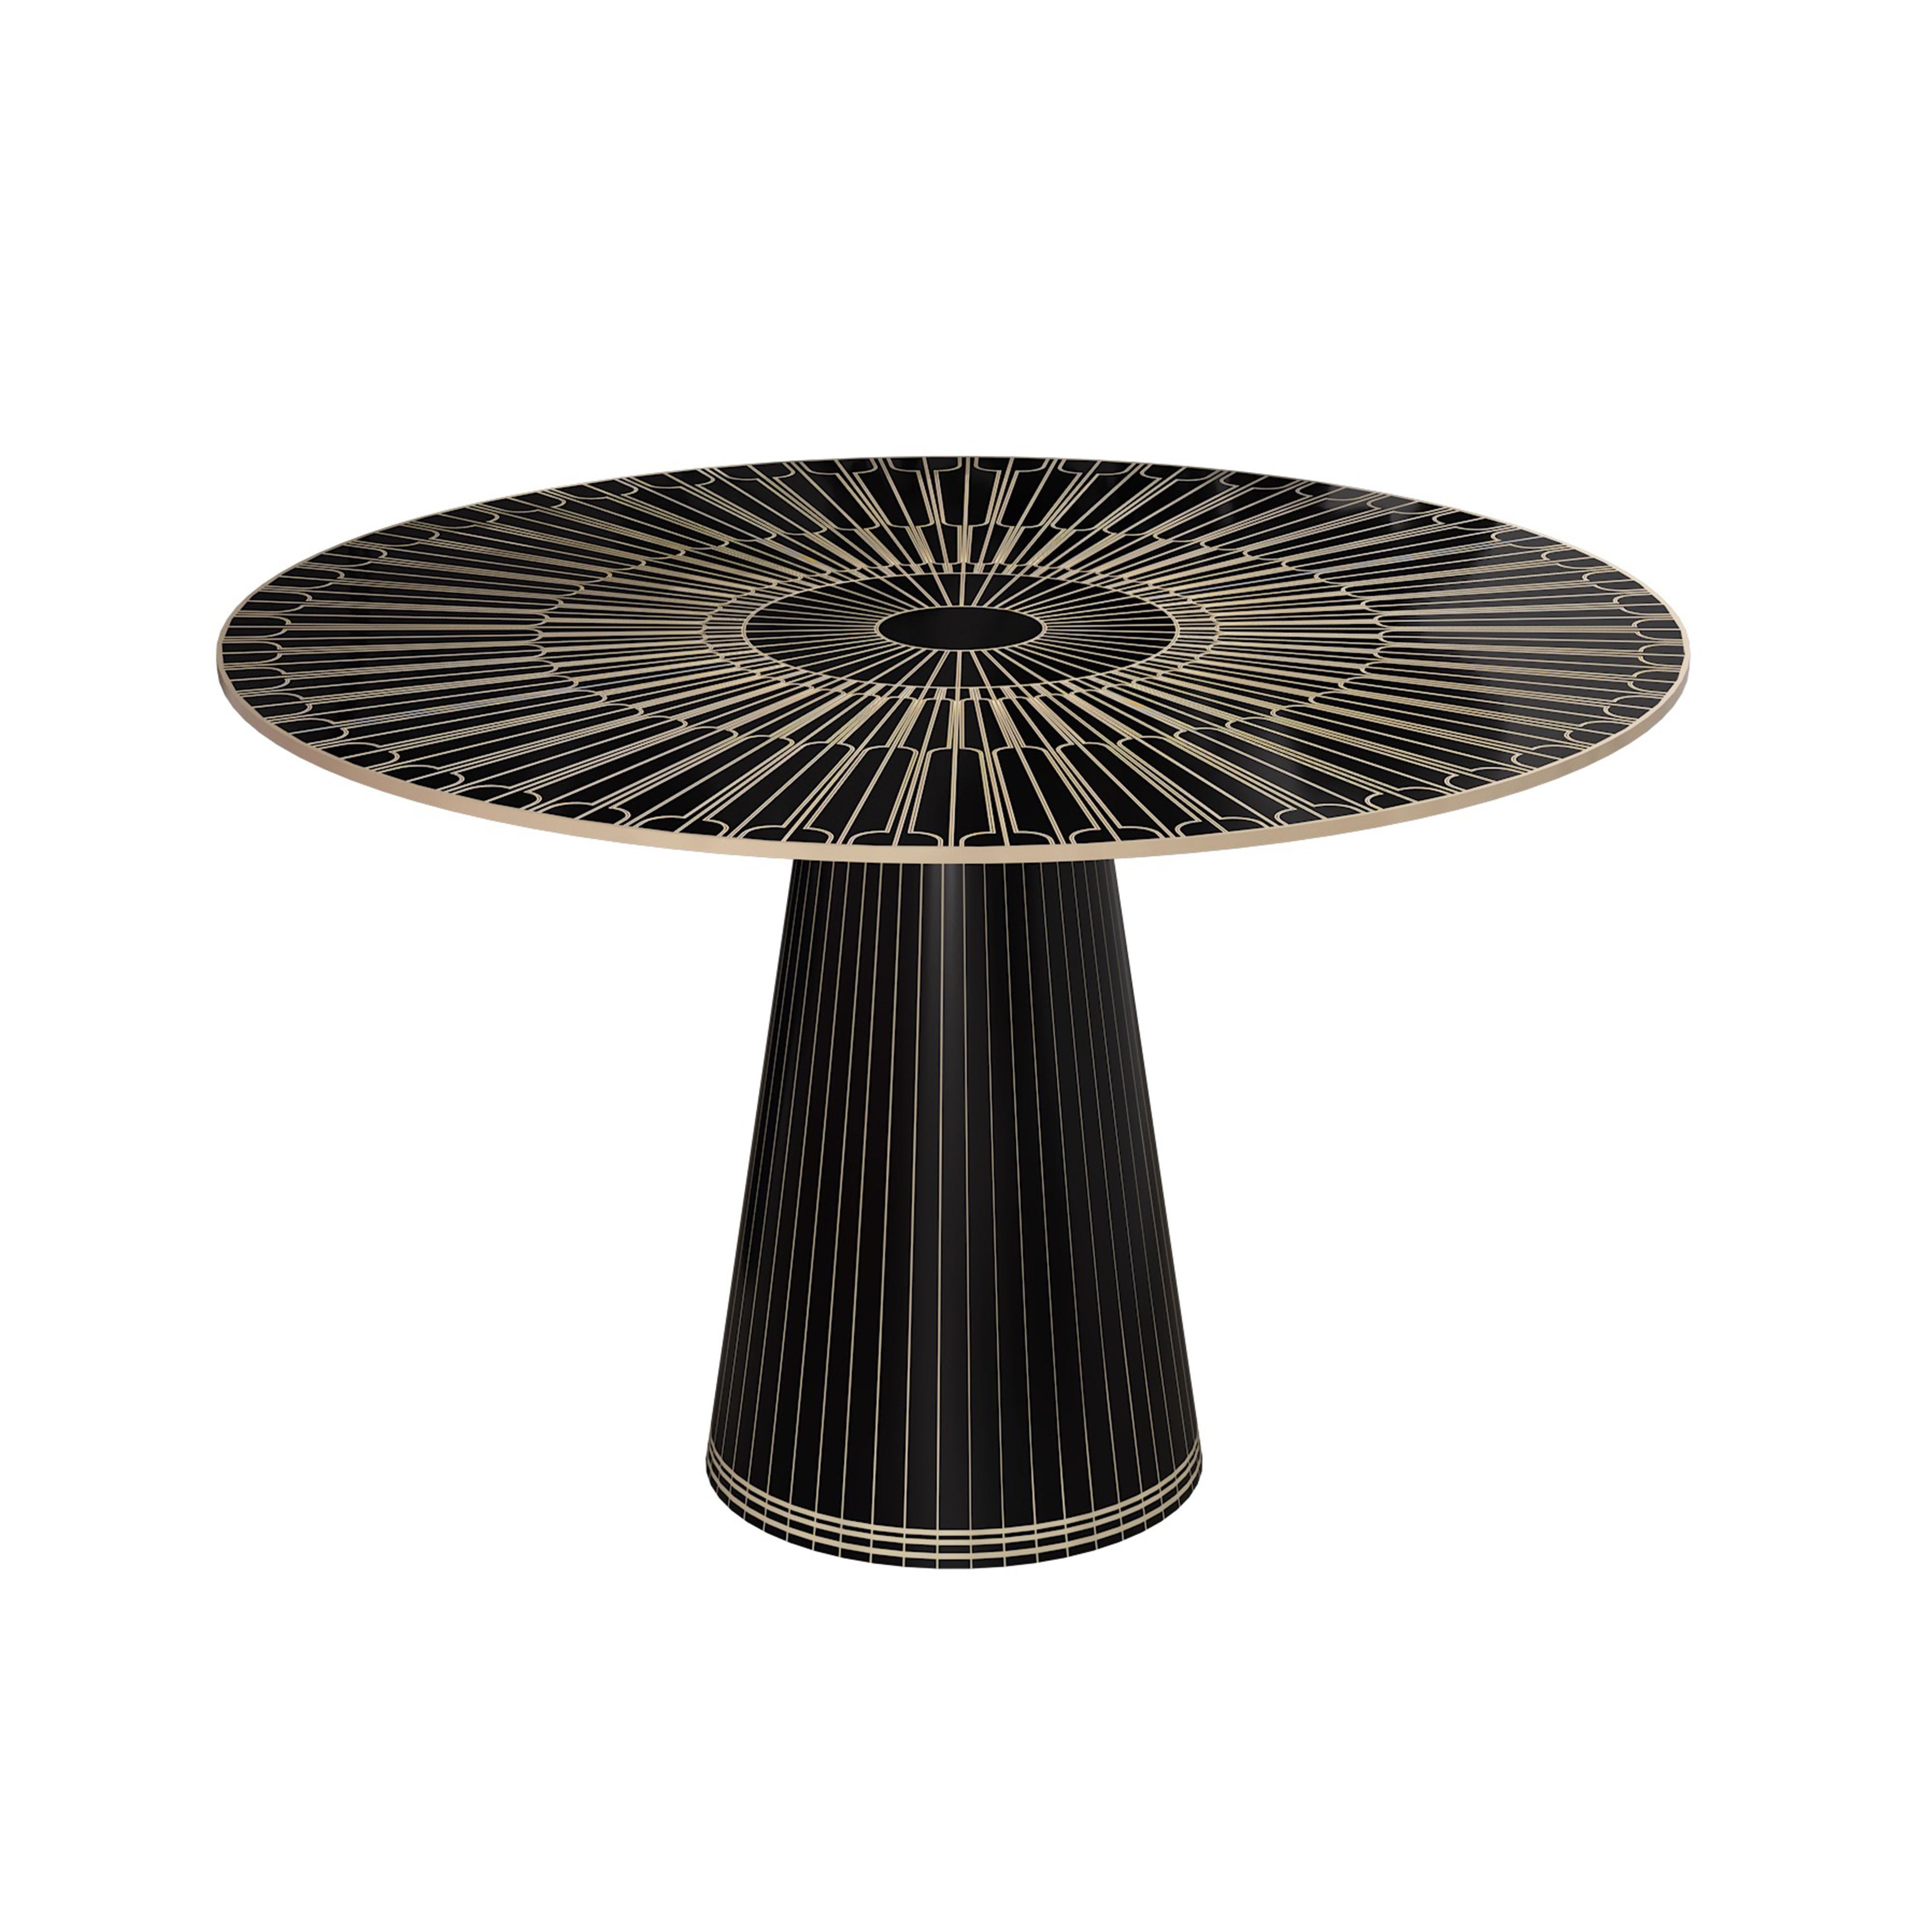 The metropolis revisited black by matteo Cibic, is a dining/ breakfast table for four, that enhances any space with with its gleaming black and vanilla pattern

India's handicrafts are as multifarious as its cultures, and as rich as its history.